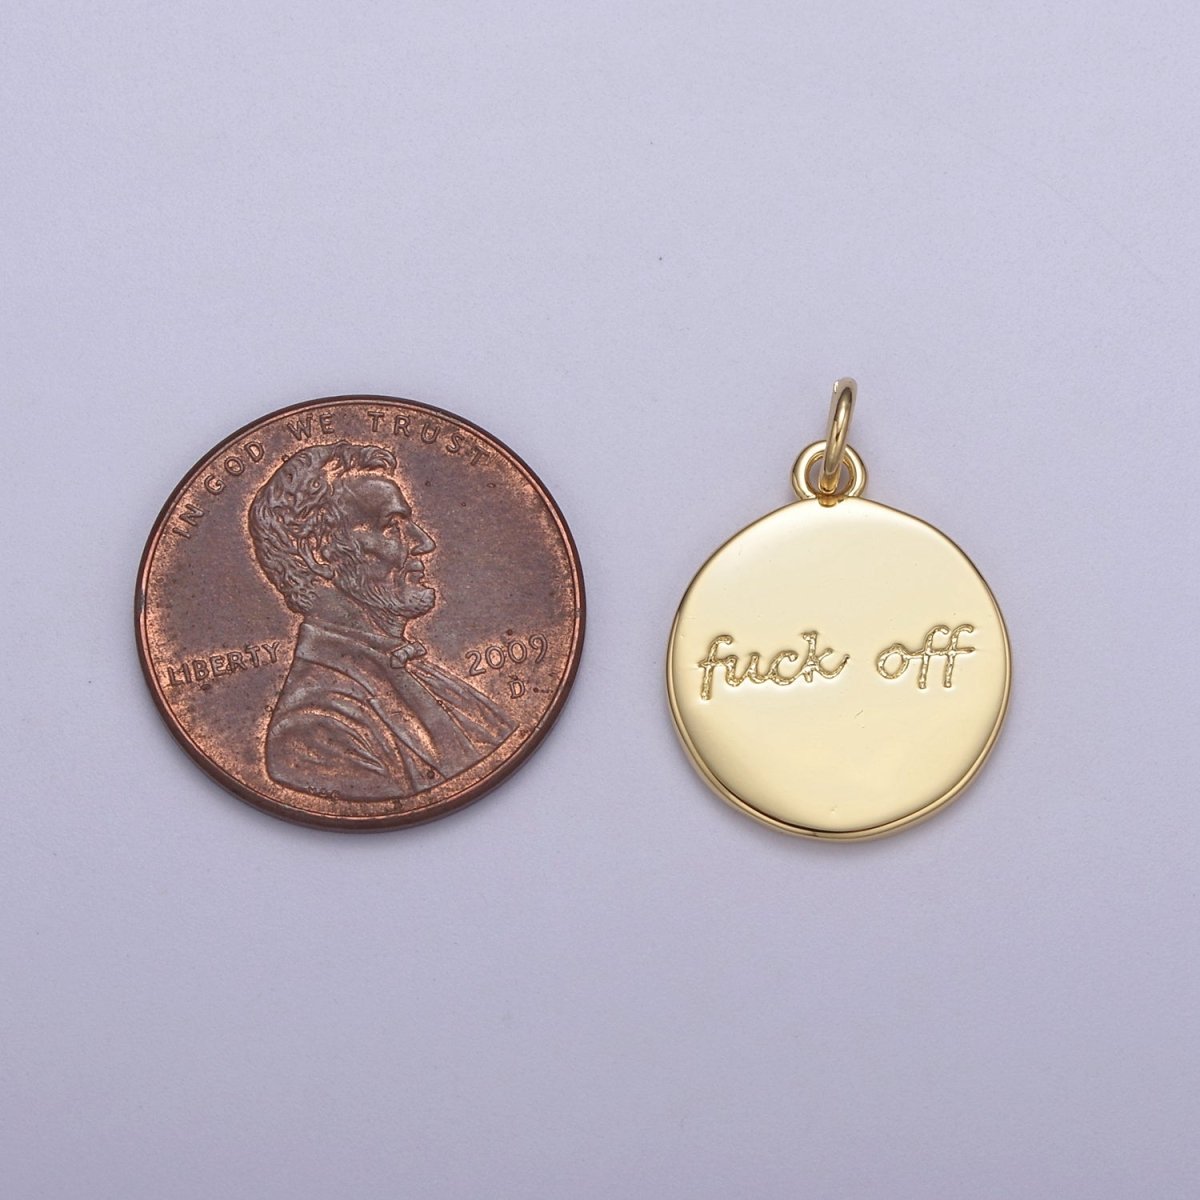 Dainty Fuck Off Charm Round Coin Disc Charm Fuck Jewelry Personalized Necklace, Swear Word Funny Add on Charm N-636 - DLUXCA